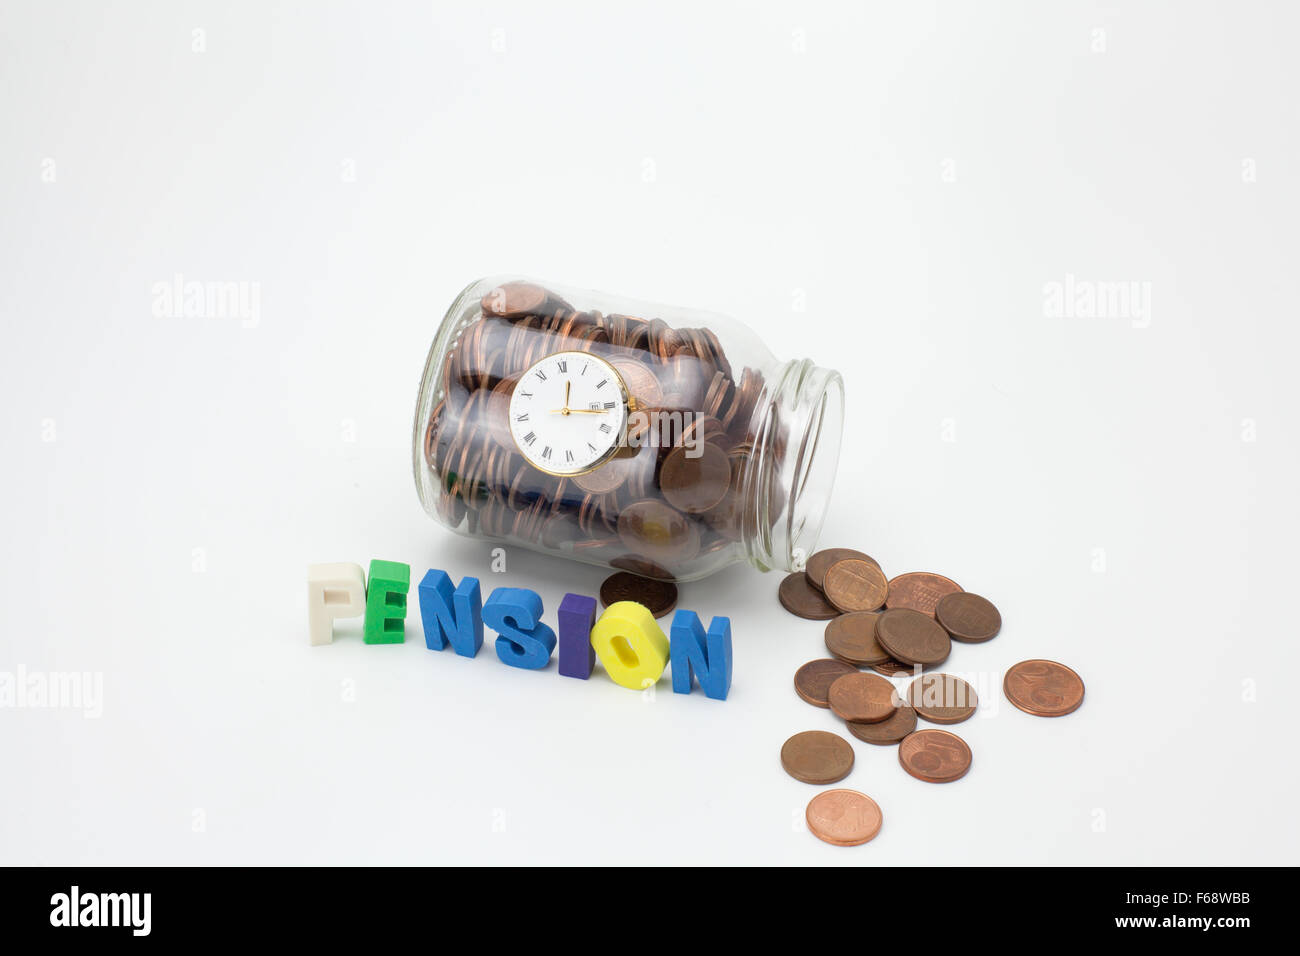 Pension coins in a glass jar with text and clock Stock Photo